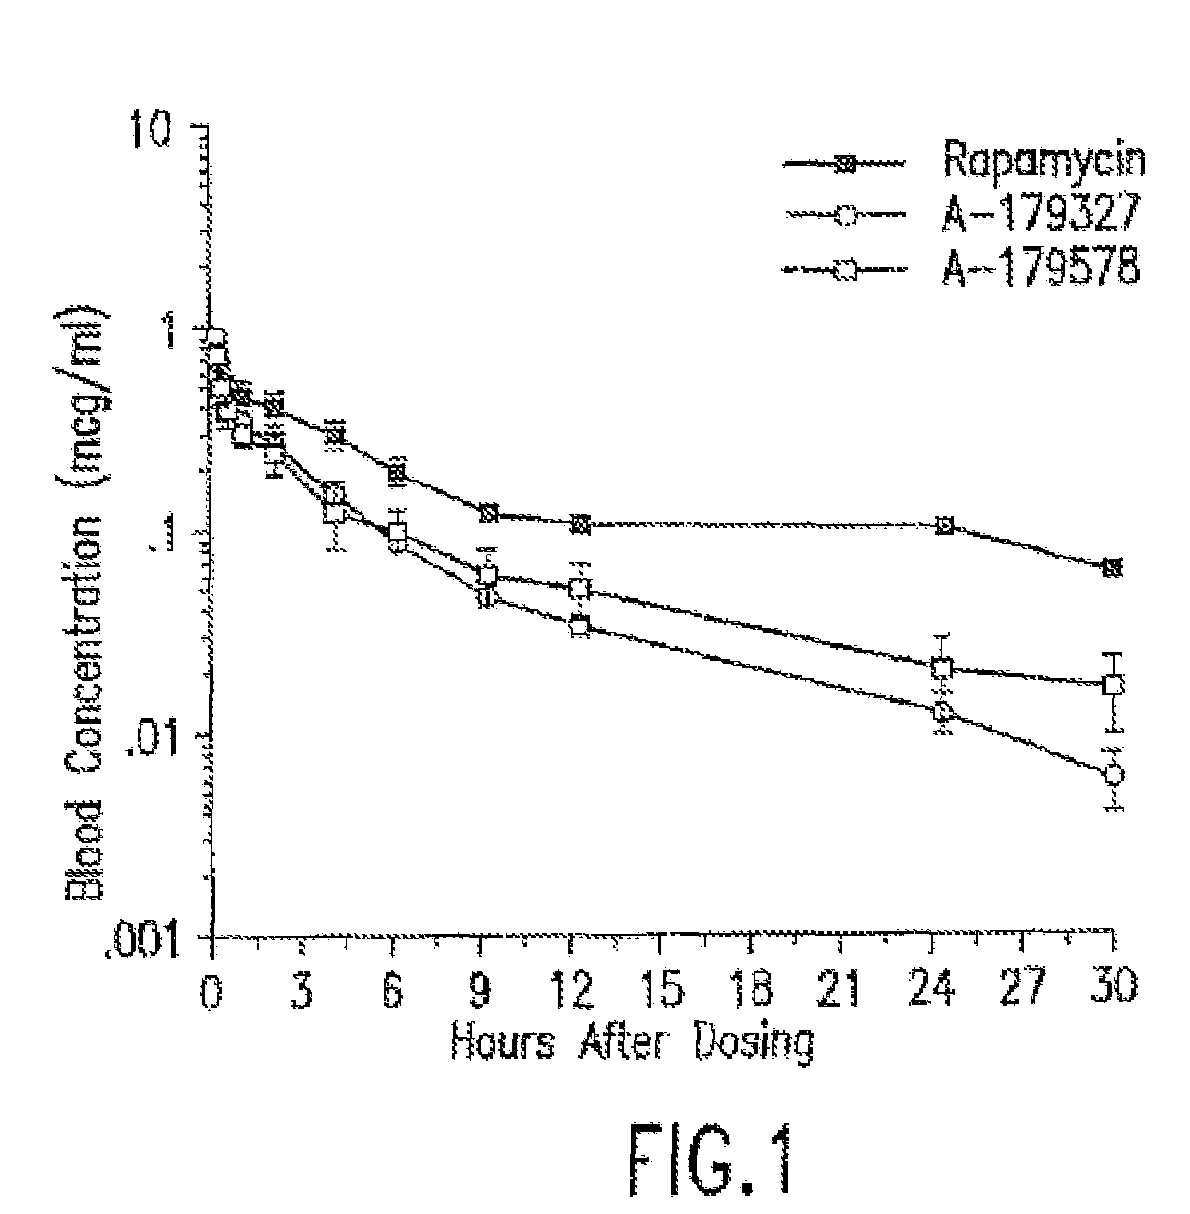 Drug delivery systems, kits, and methods for administering zotarolimus and paclitaxel to blood vessel lumens